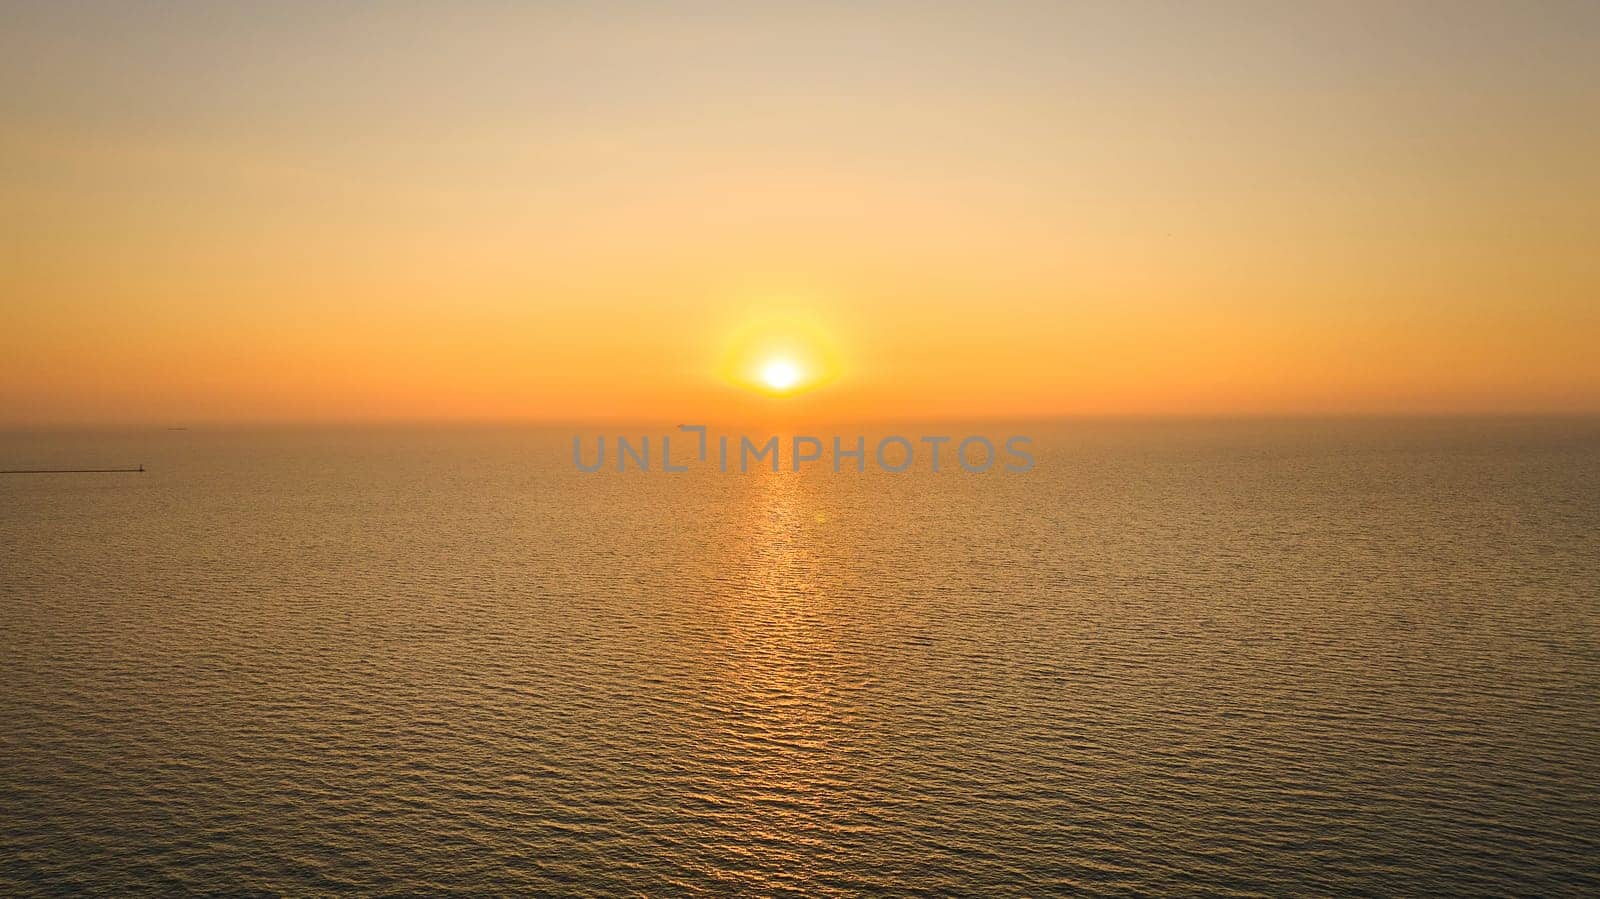 Aerial over water with inspiring sun rising over great Lake Michigan, sunrise at dawn, Chicago, IL by njproductions